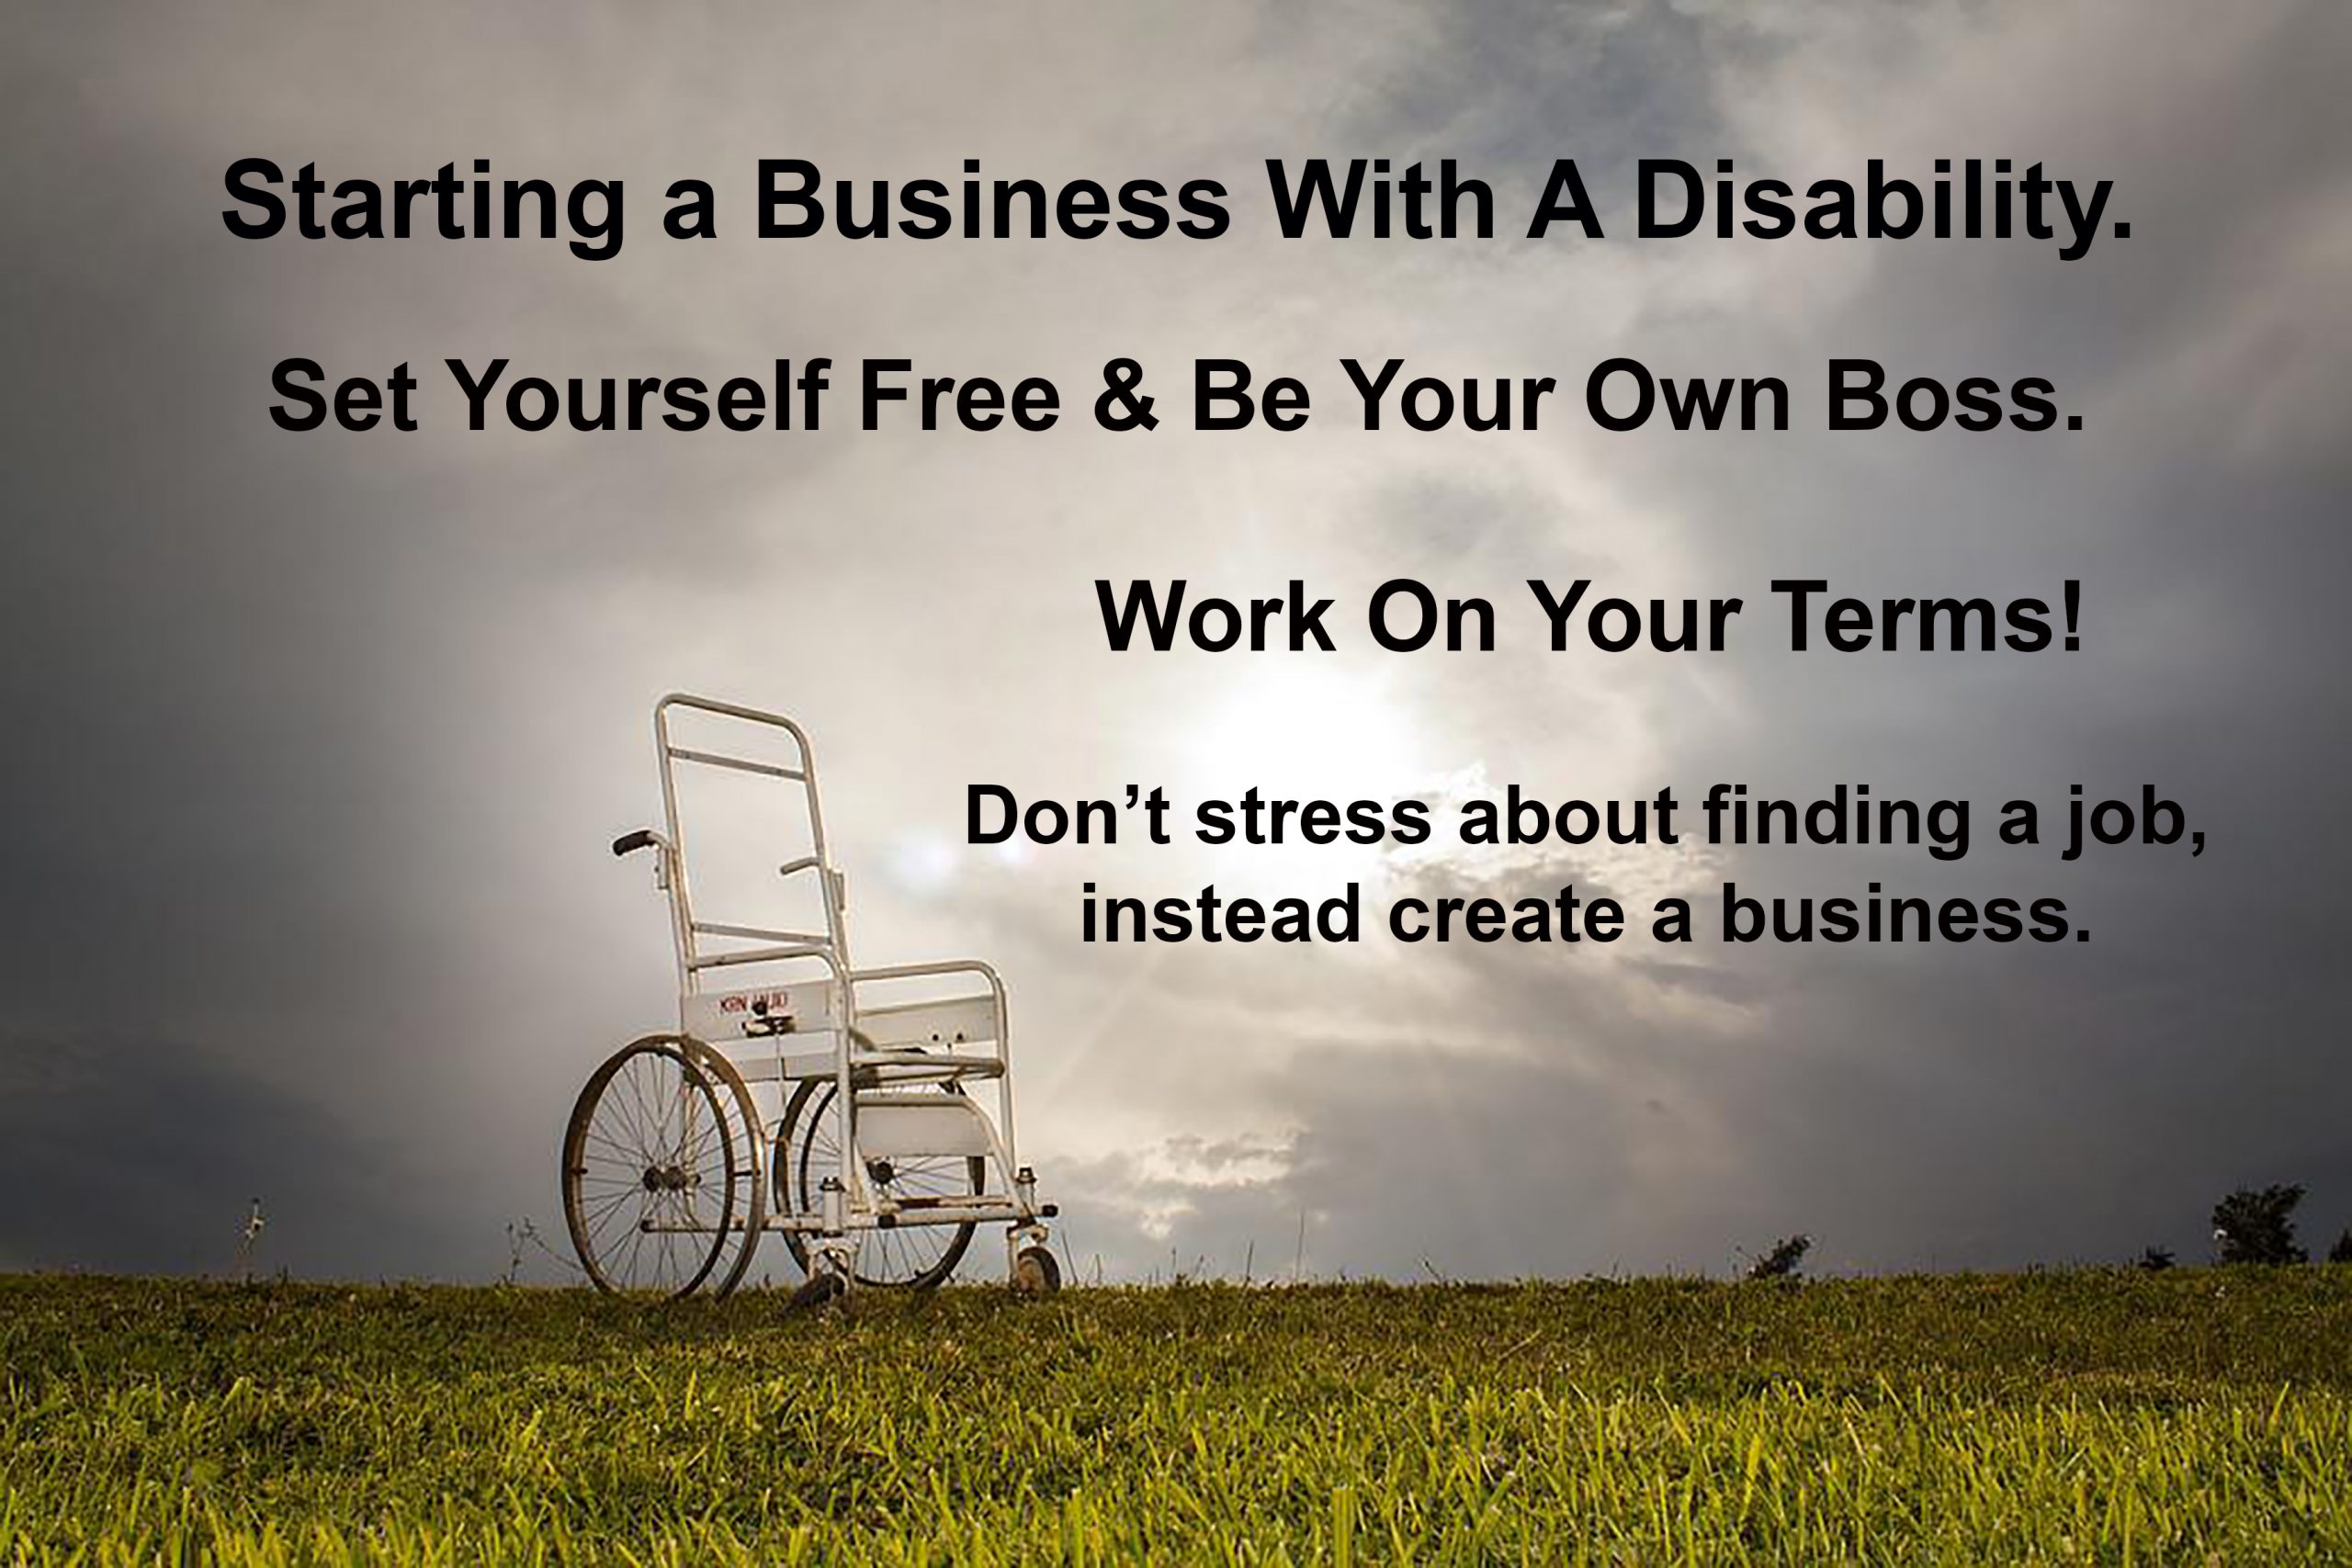 Wheel Chair, Work On Your Own Terms!